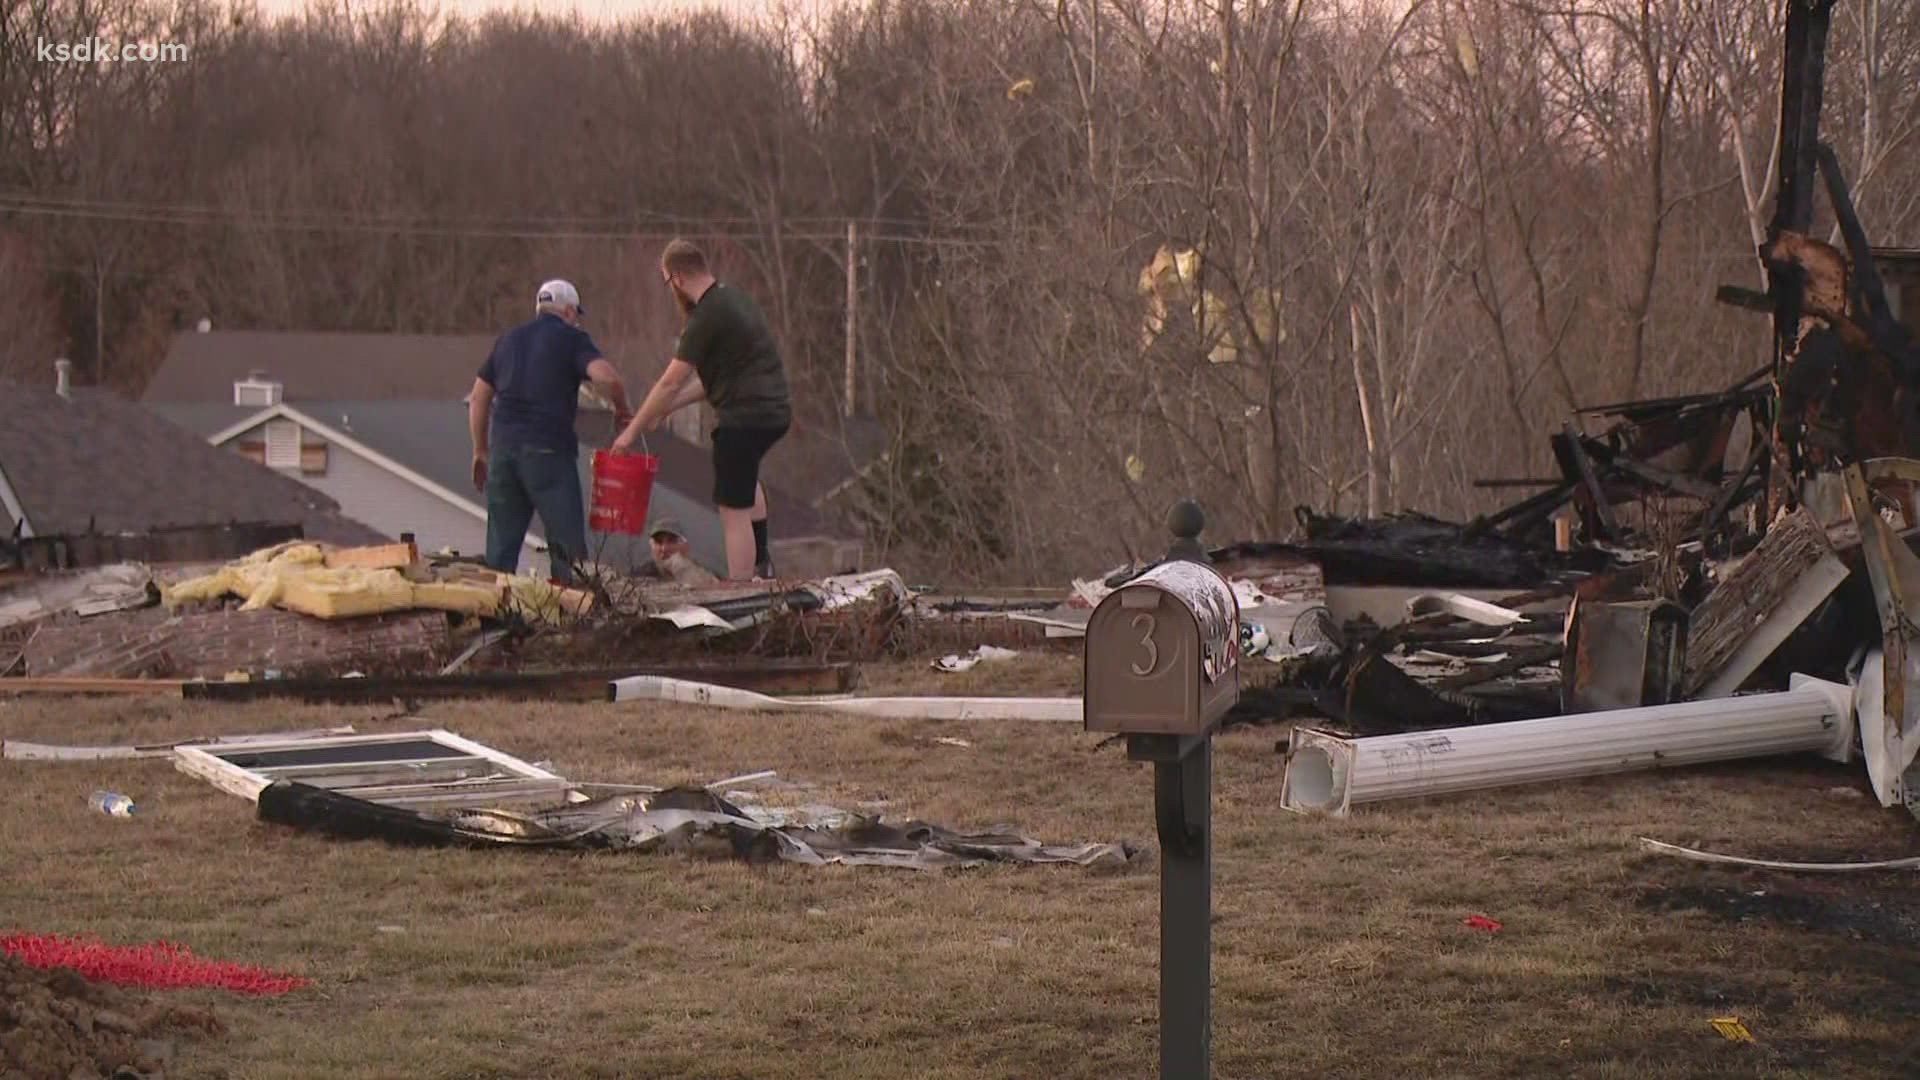 The family escaped and no one was injured in the explosion.